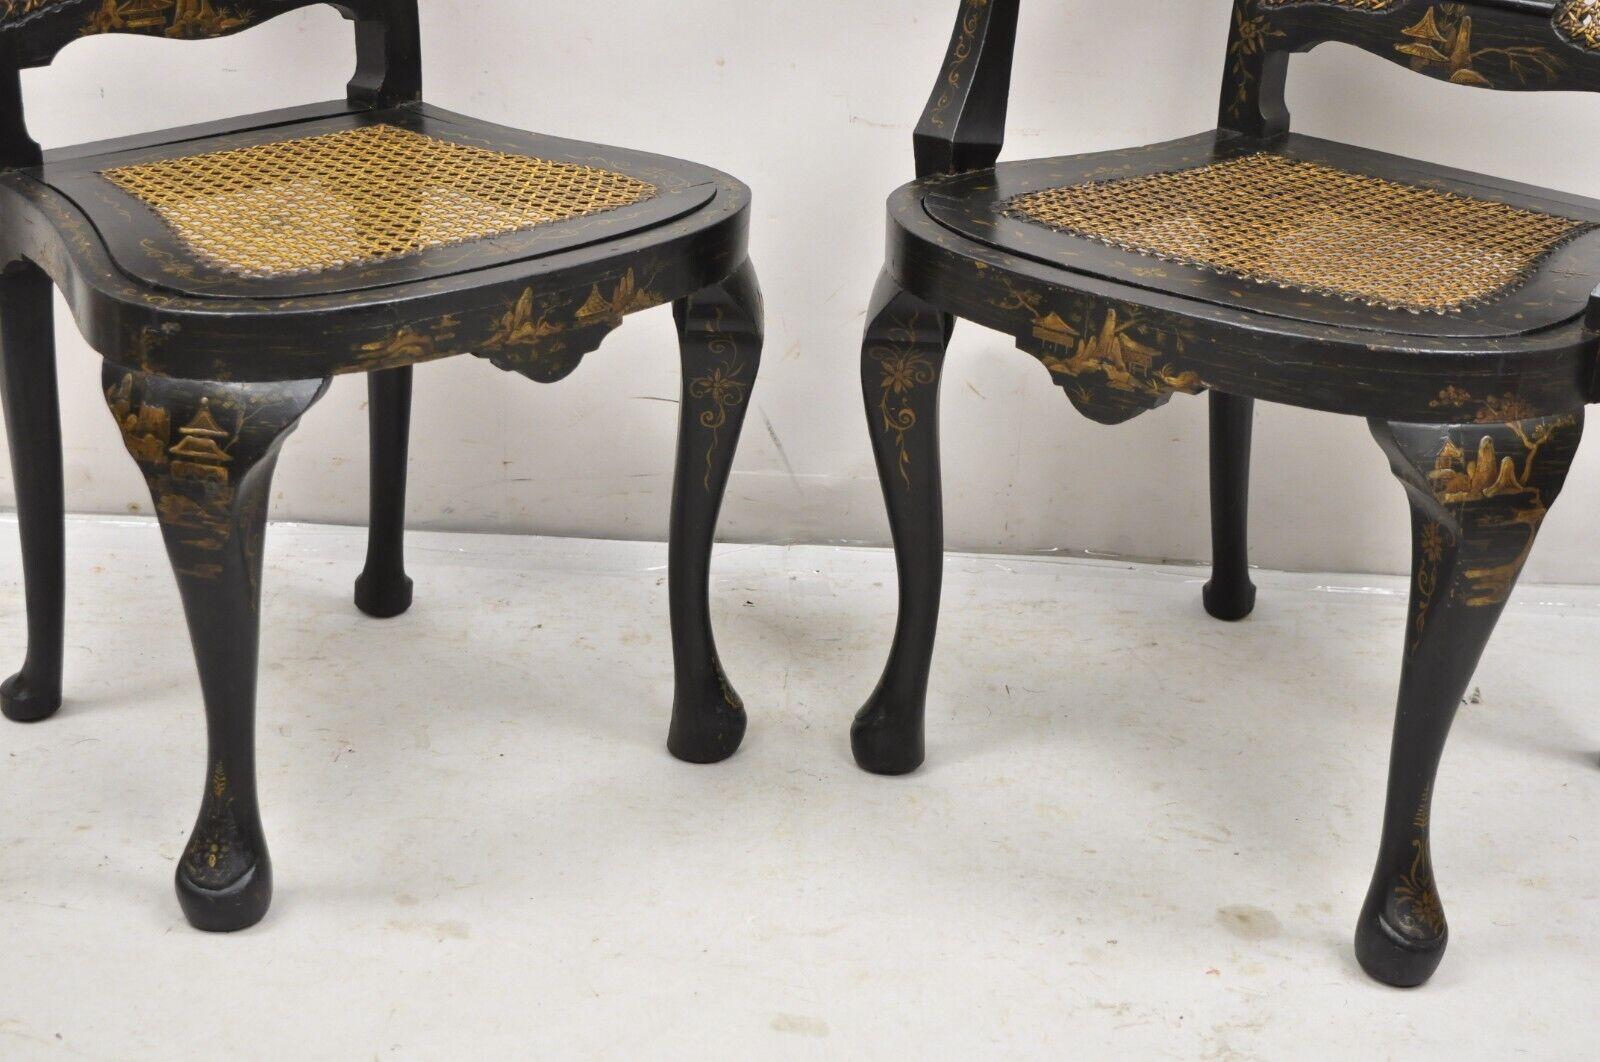 Antique Chinoiserie Queen Anne Hand Painted Floral Cane Dining Chairs - Set of 4 For Sale 3